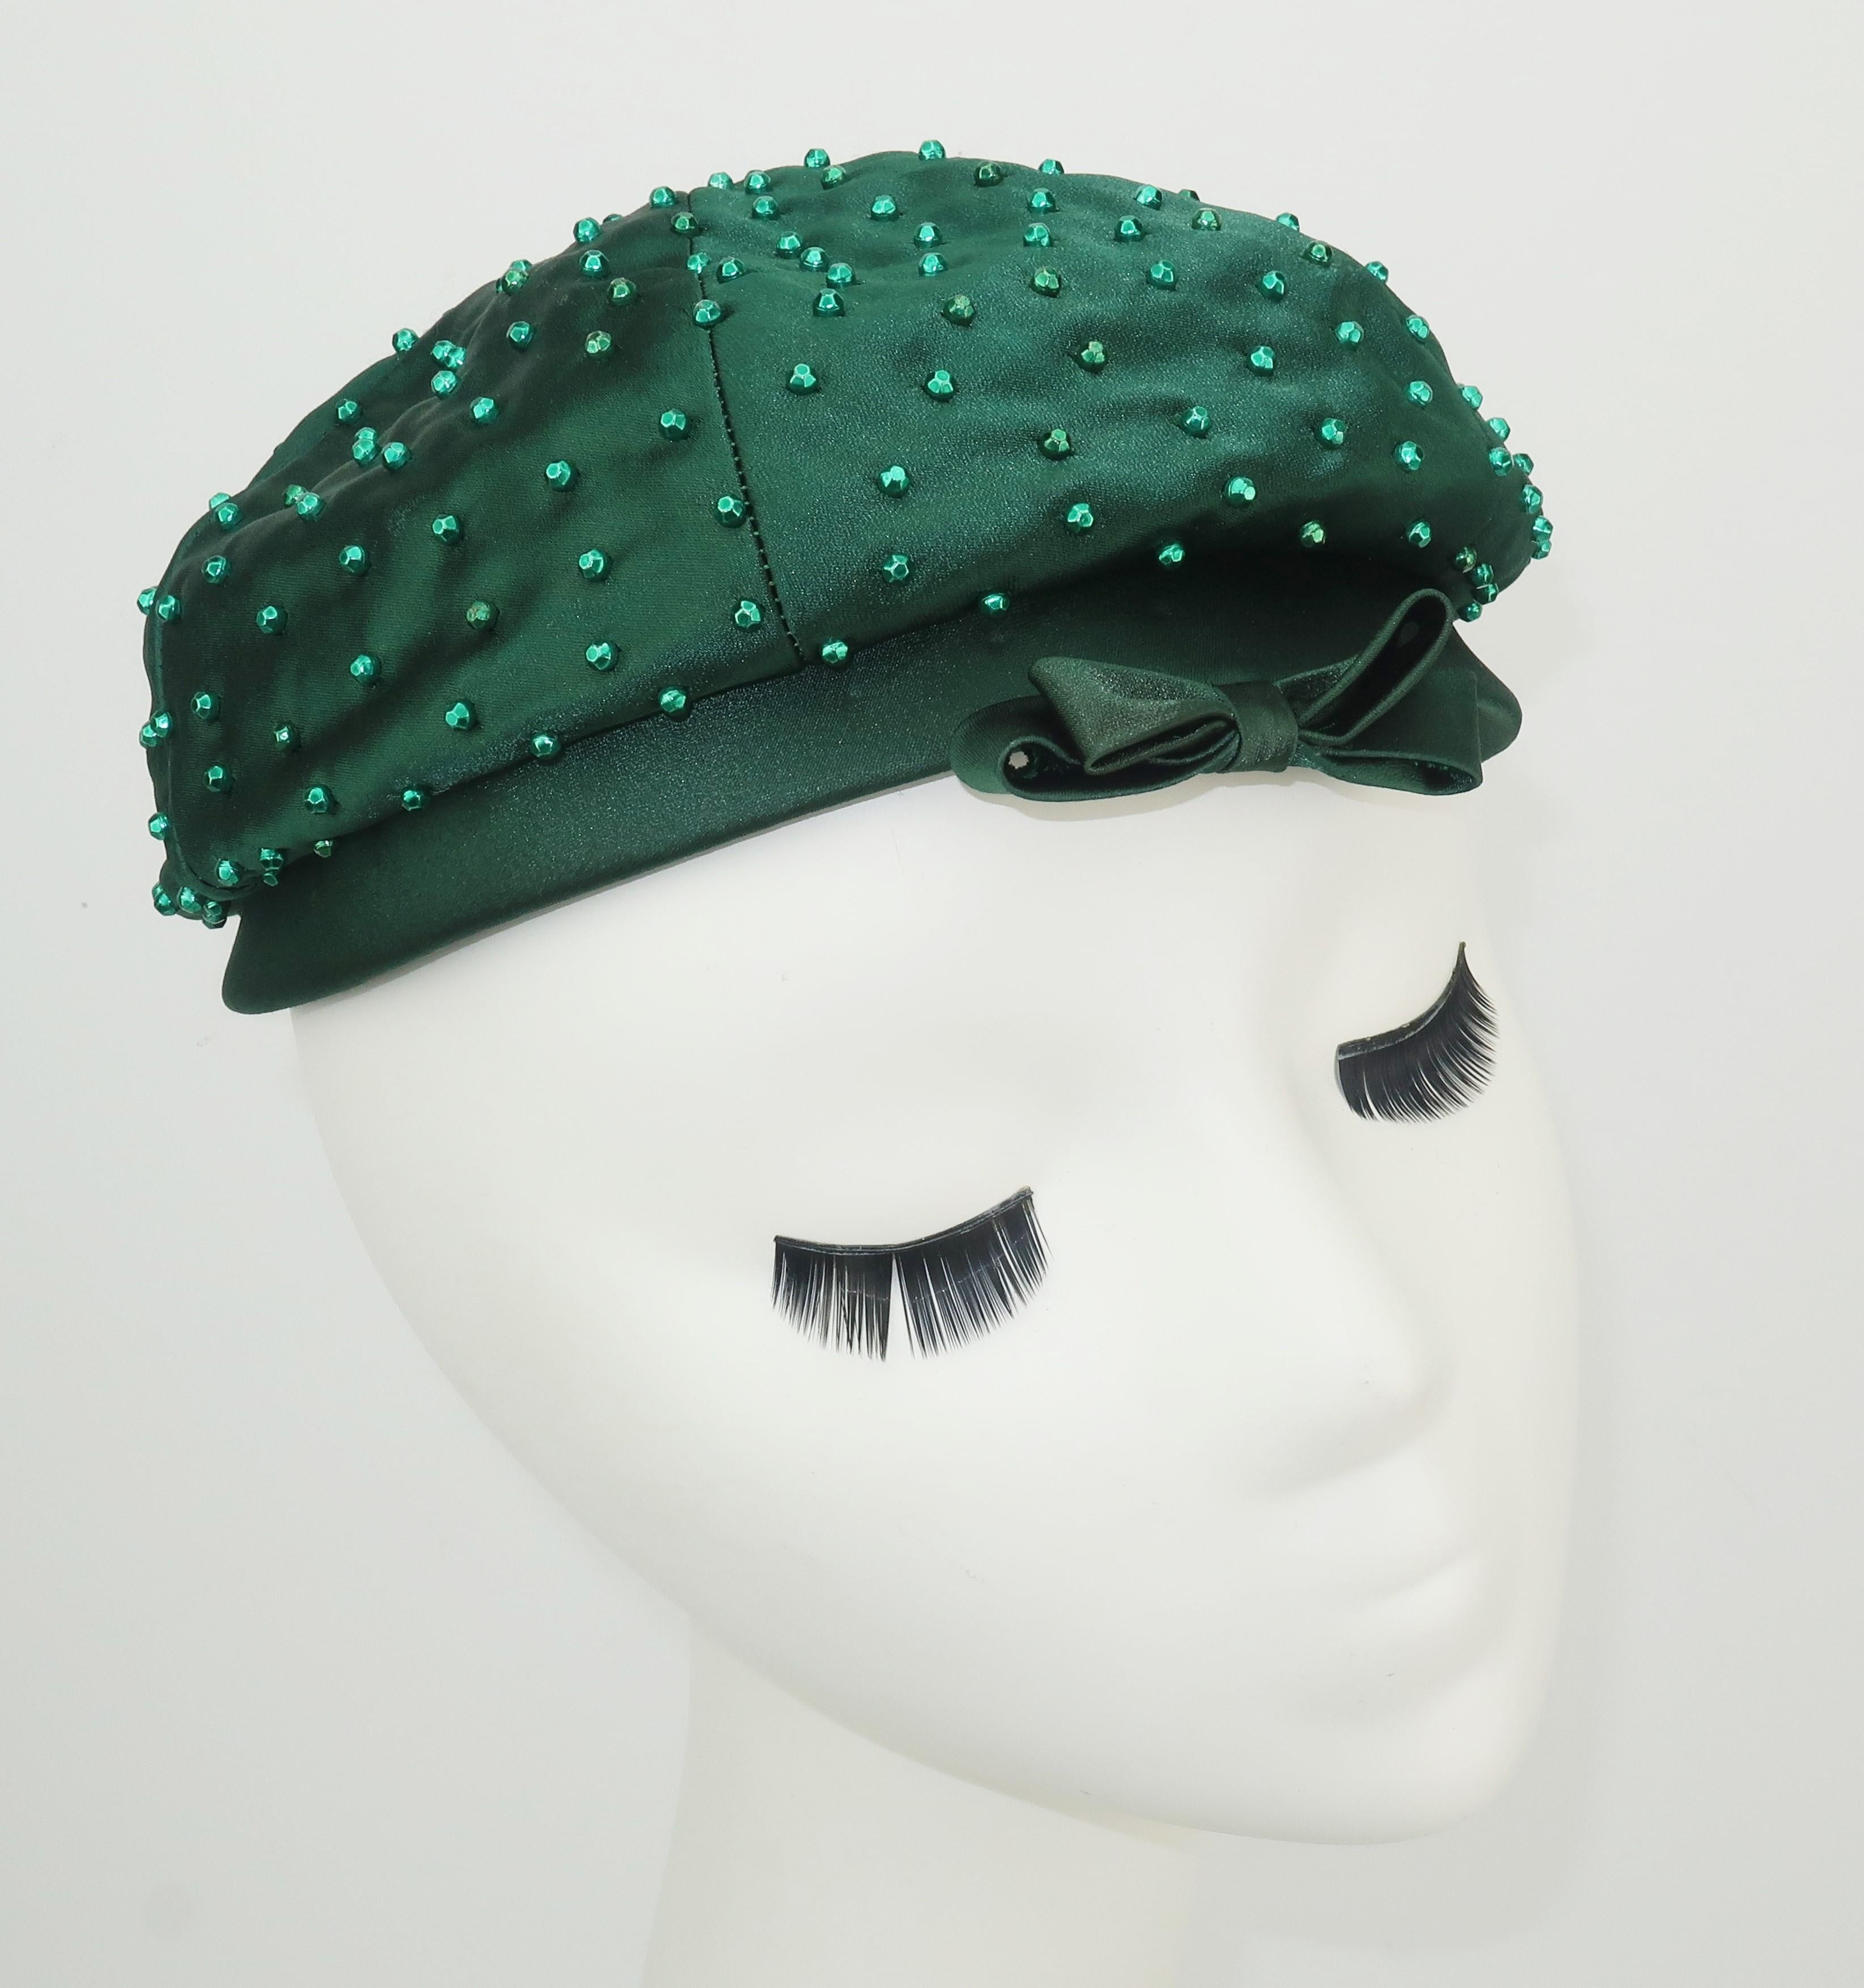 A 1950's Evelyn Varon tam style hat in a rich hunter green satin embellished with faceted beads and a bow.  Perfect for adding glamour to day wear or a topper for evening.  Very good condition ... appears rarely worn.
MEASUREMENTS
The inside rim